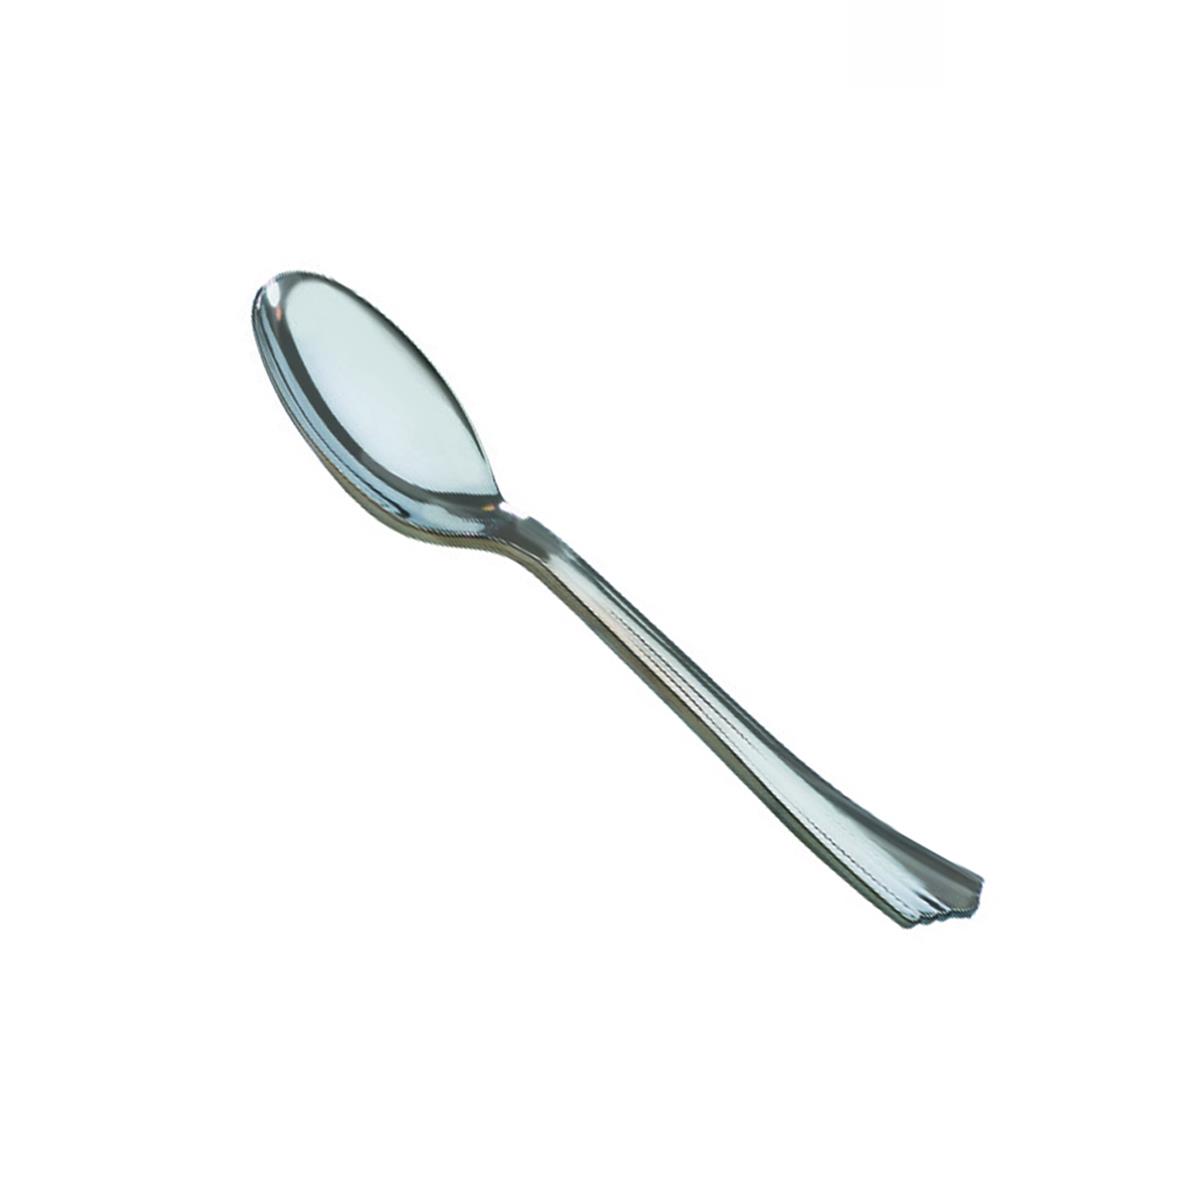 Picture of WNA Comet West RFPSP4 PEC Silver 4.75 in. Reflections Heavy Weight Tasting Spoon - Case of 400